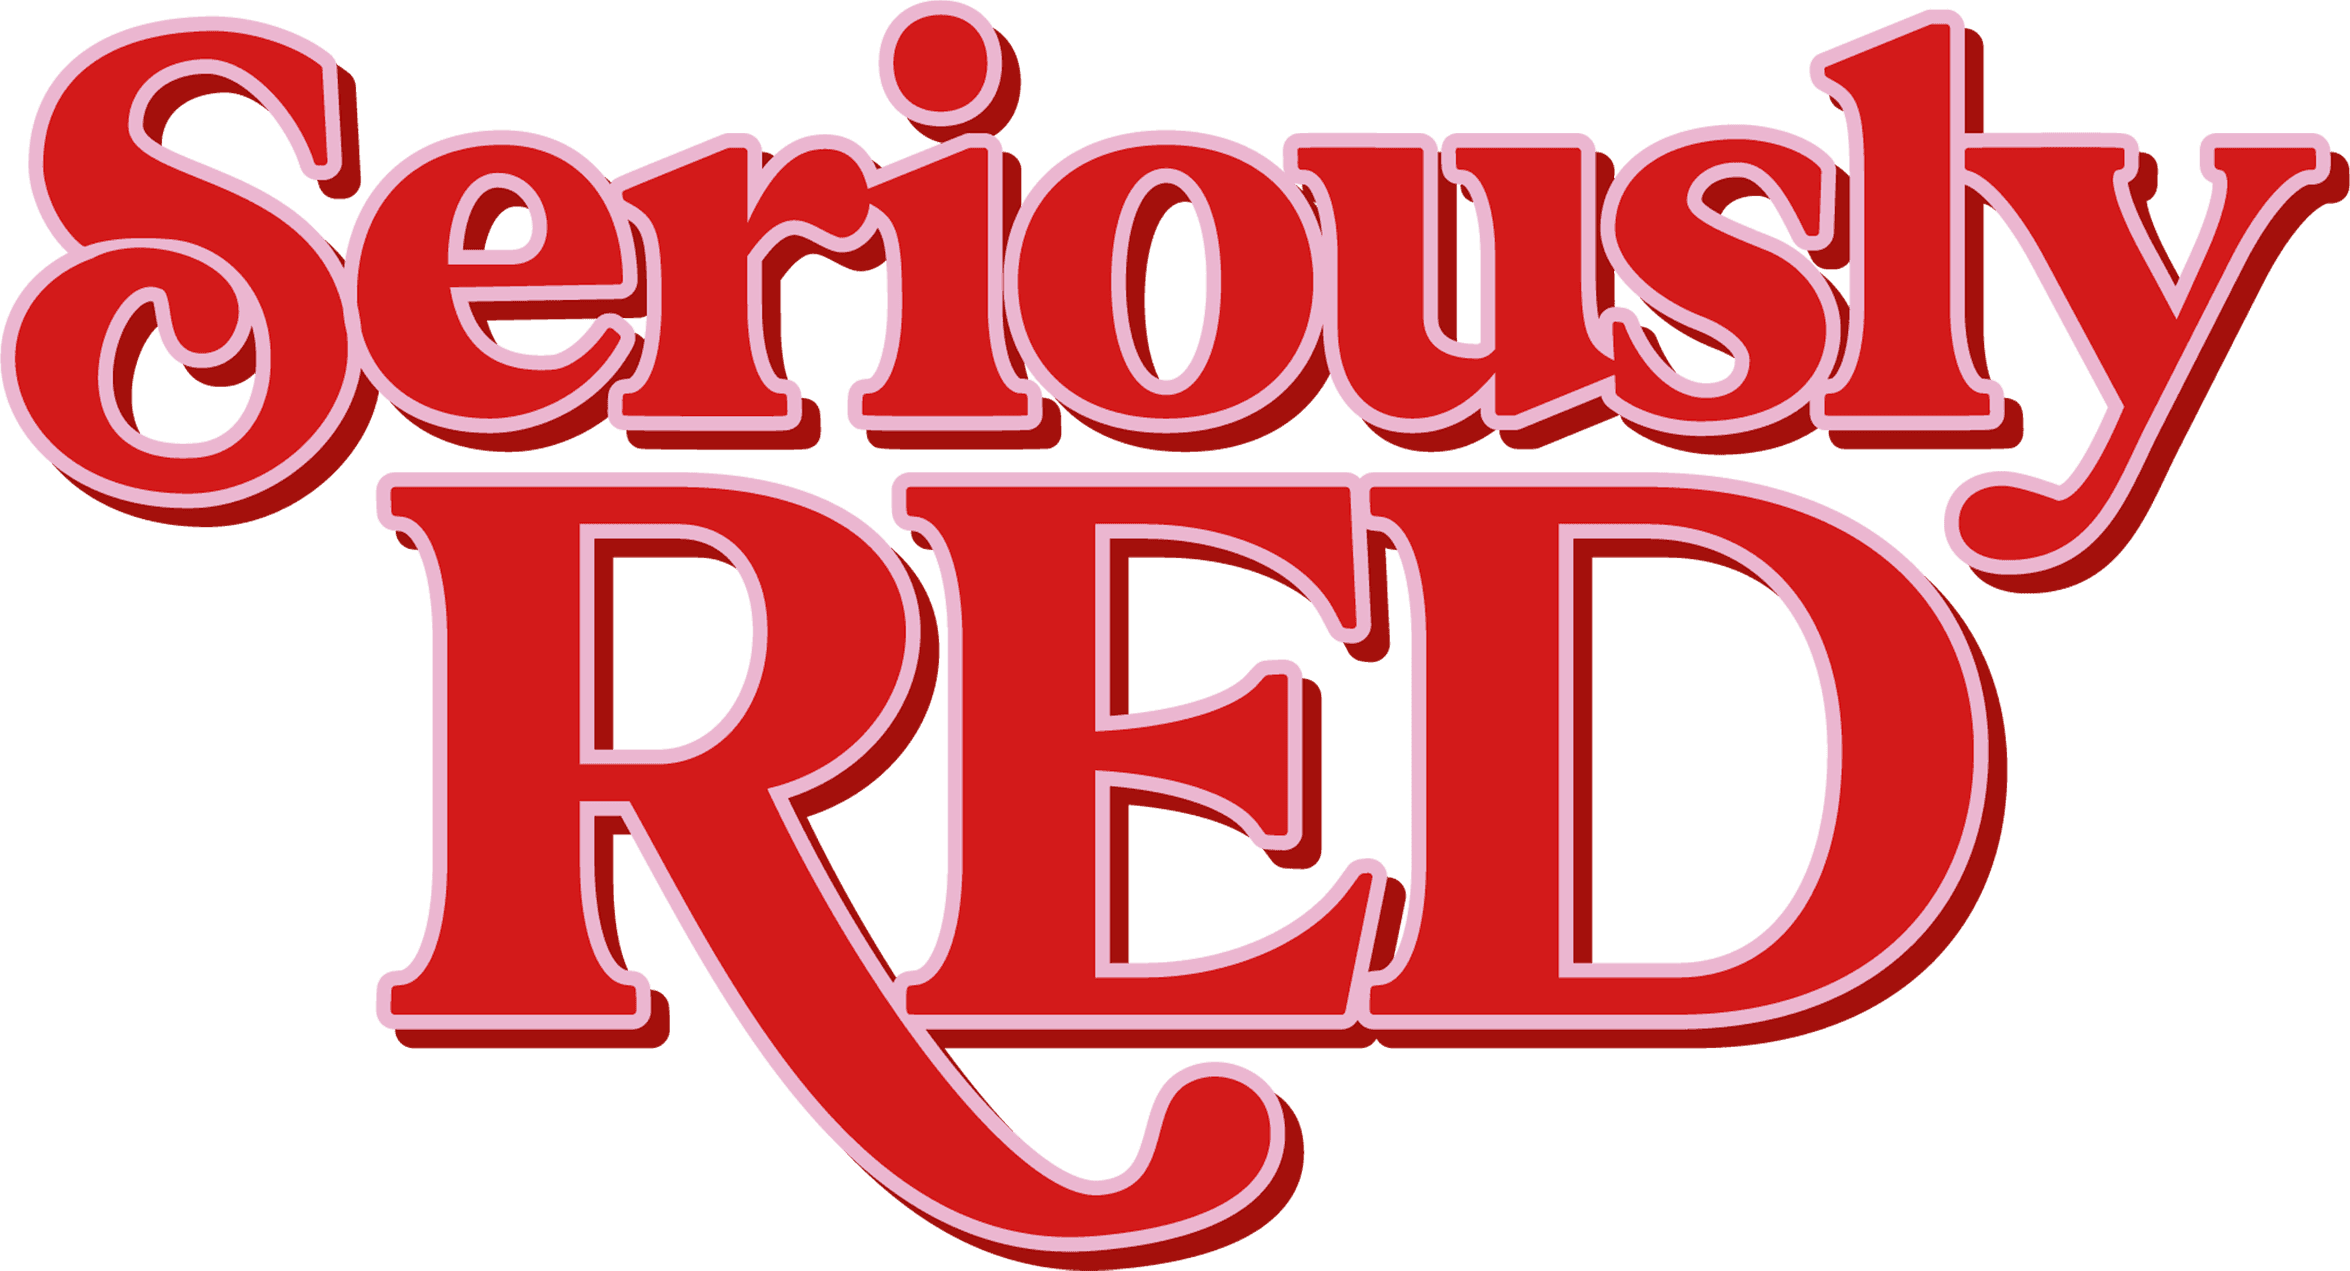 Seriously Red logo